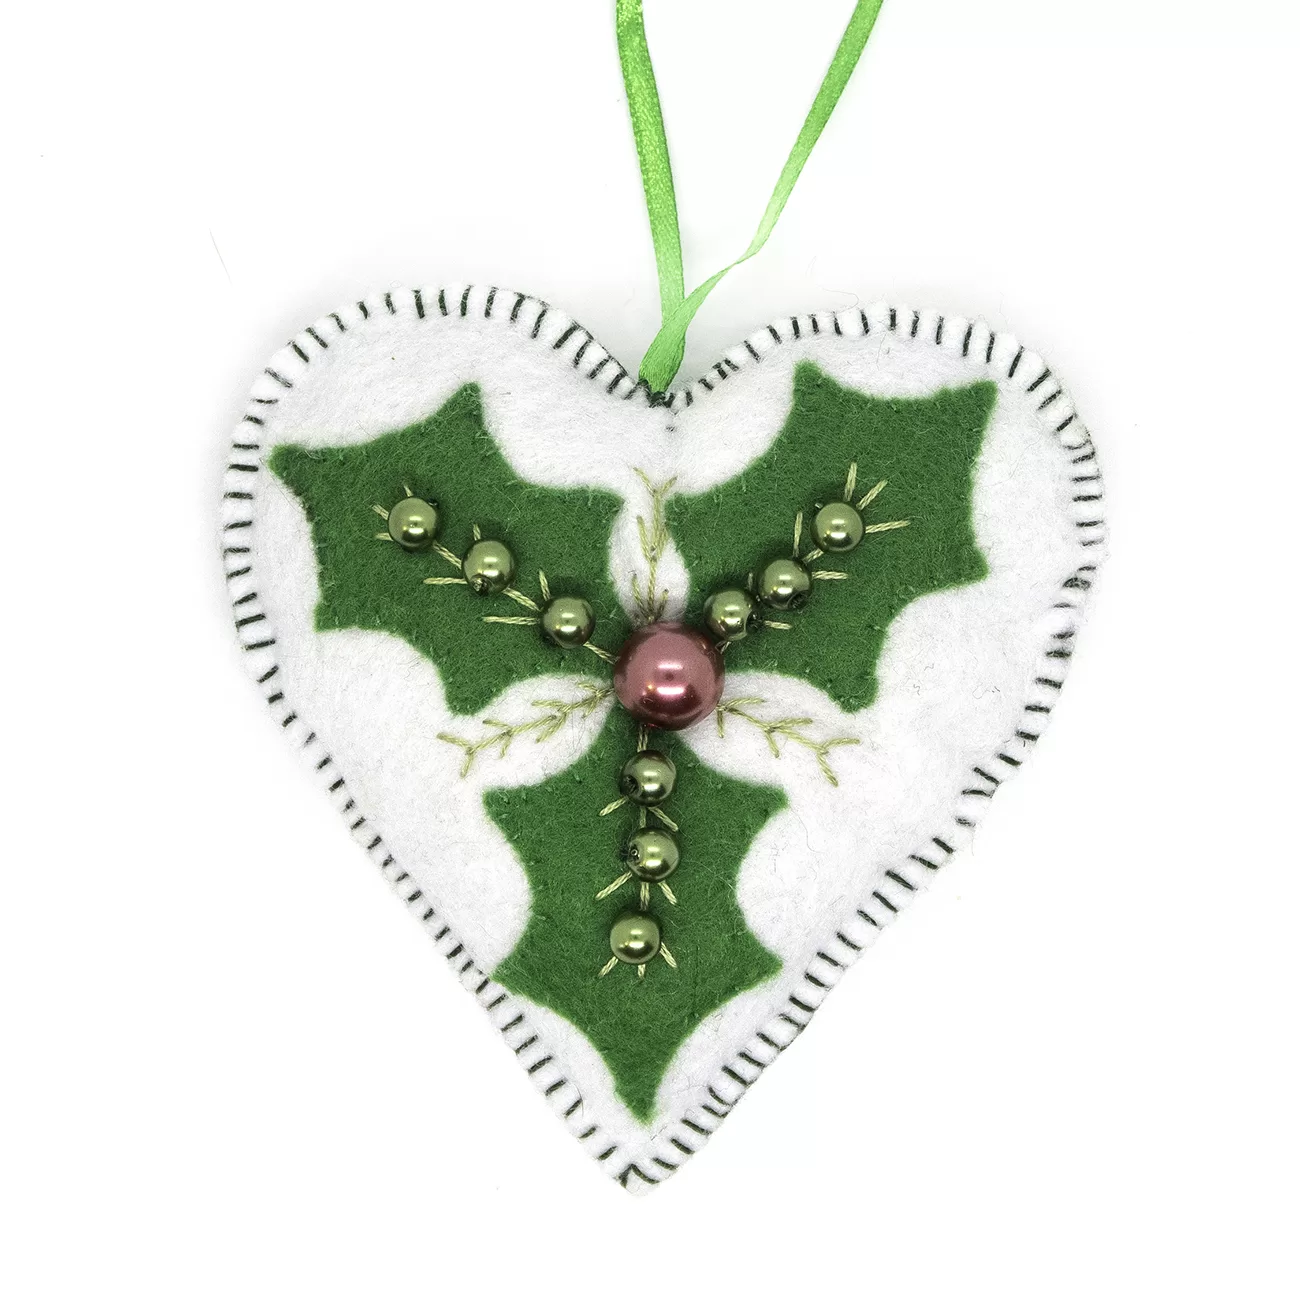 Sew creative kit – Christmas decorations, Holly leaves